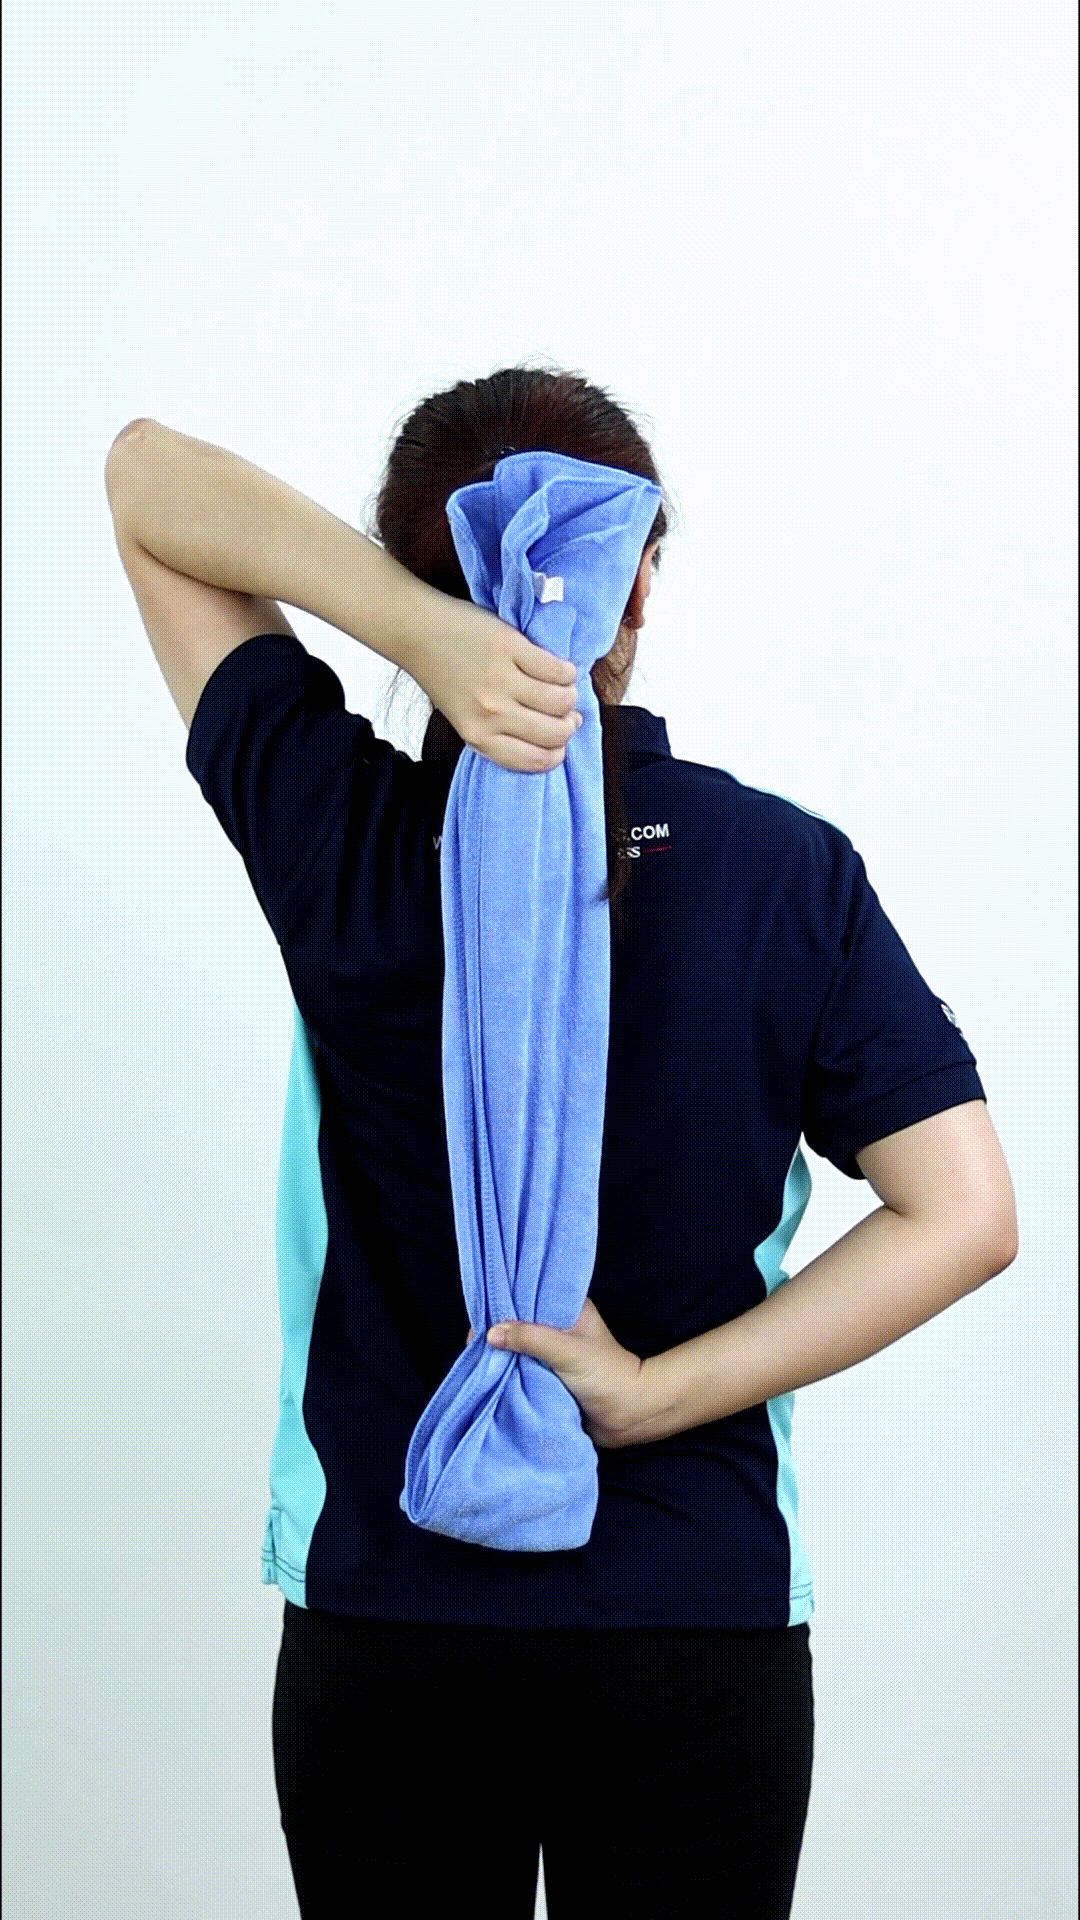 Shoulder stretch with towel